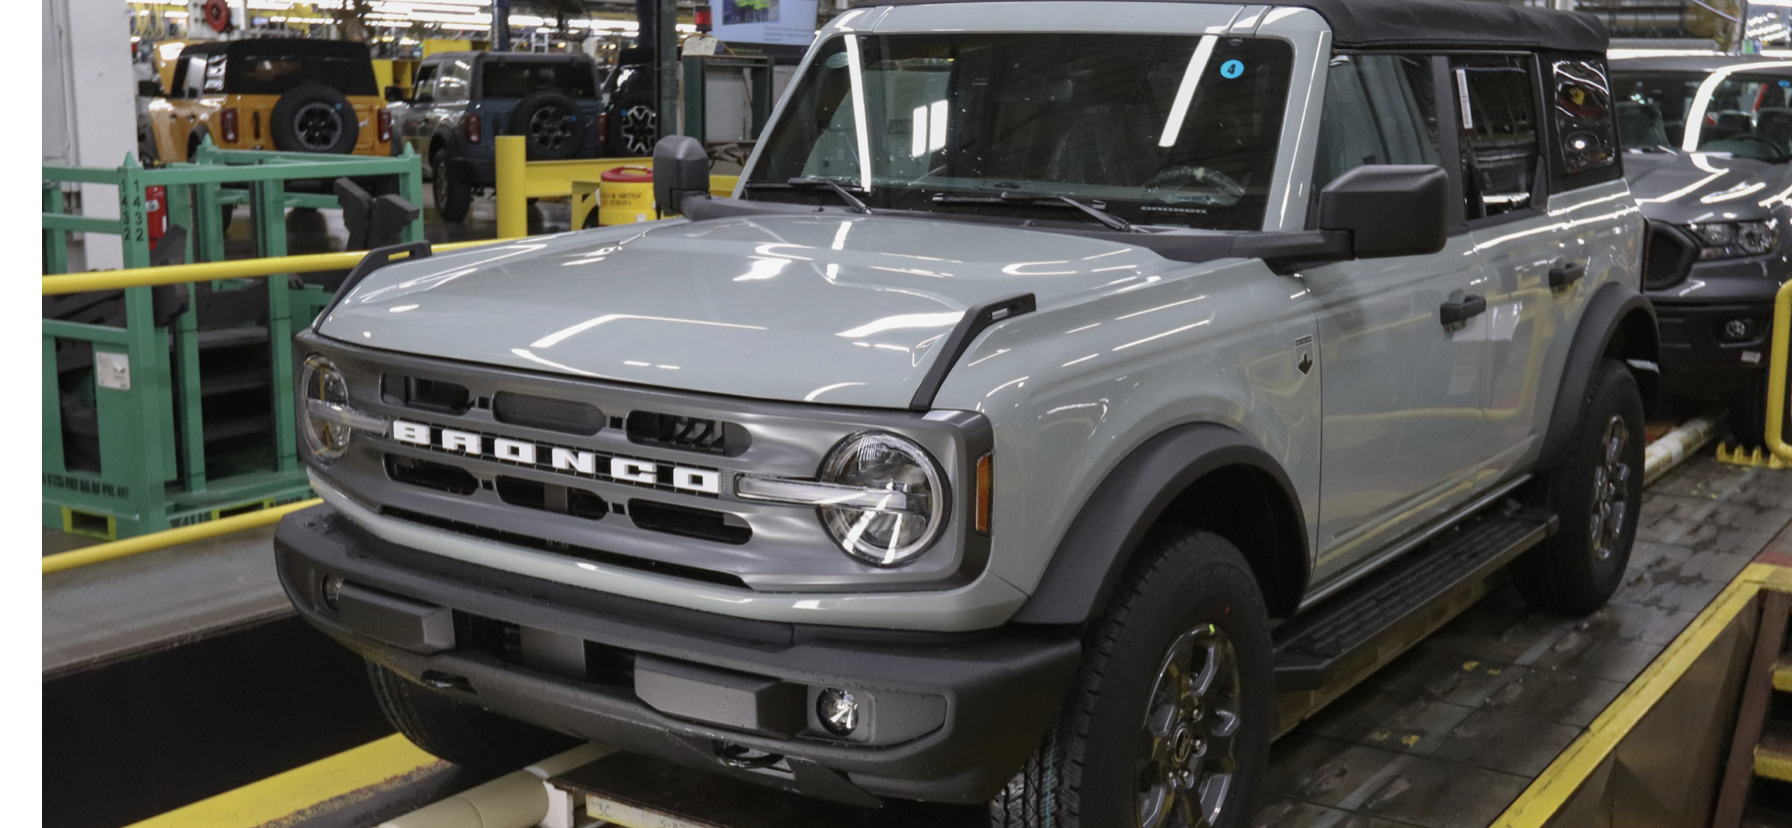 Ford Bronco Post Your Bronco Production Line Pics! (From Ford Emails Starting Today) FE7814BB-27F3-4DF0-A964-E35AA51EAF7B